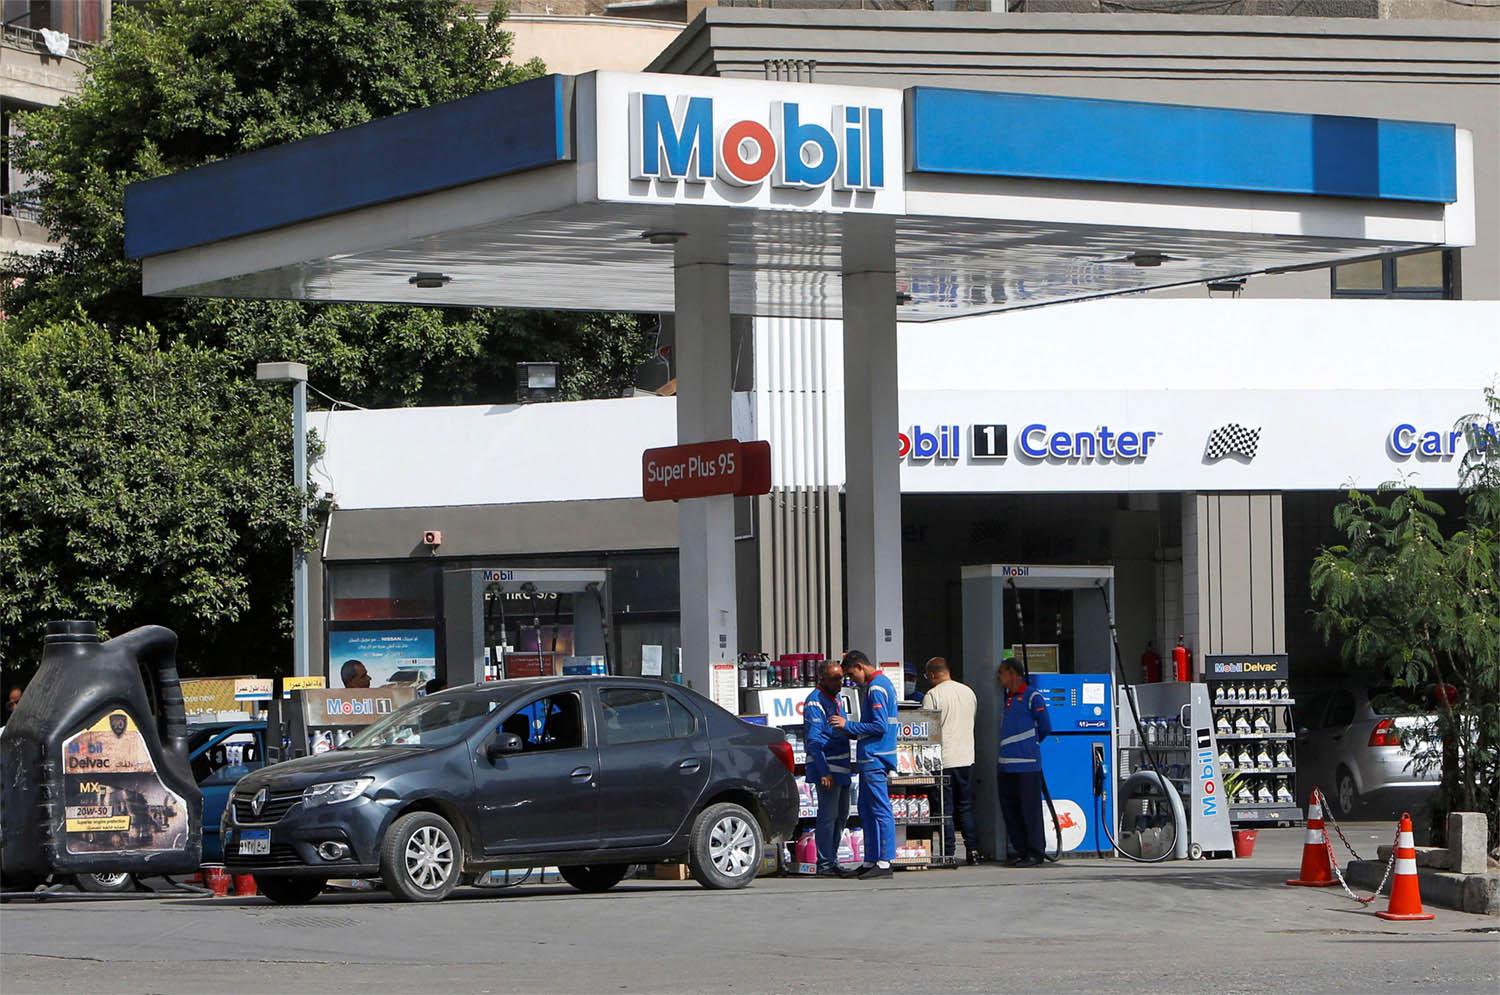 Fuel prices hikes are expected to reflect inflation rates